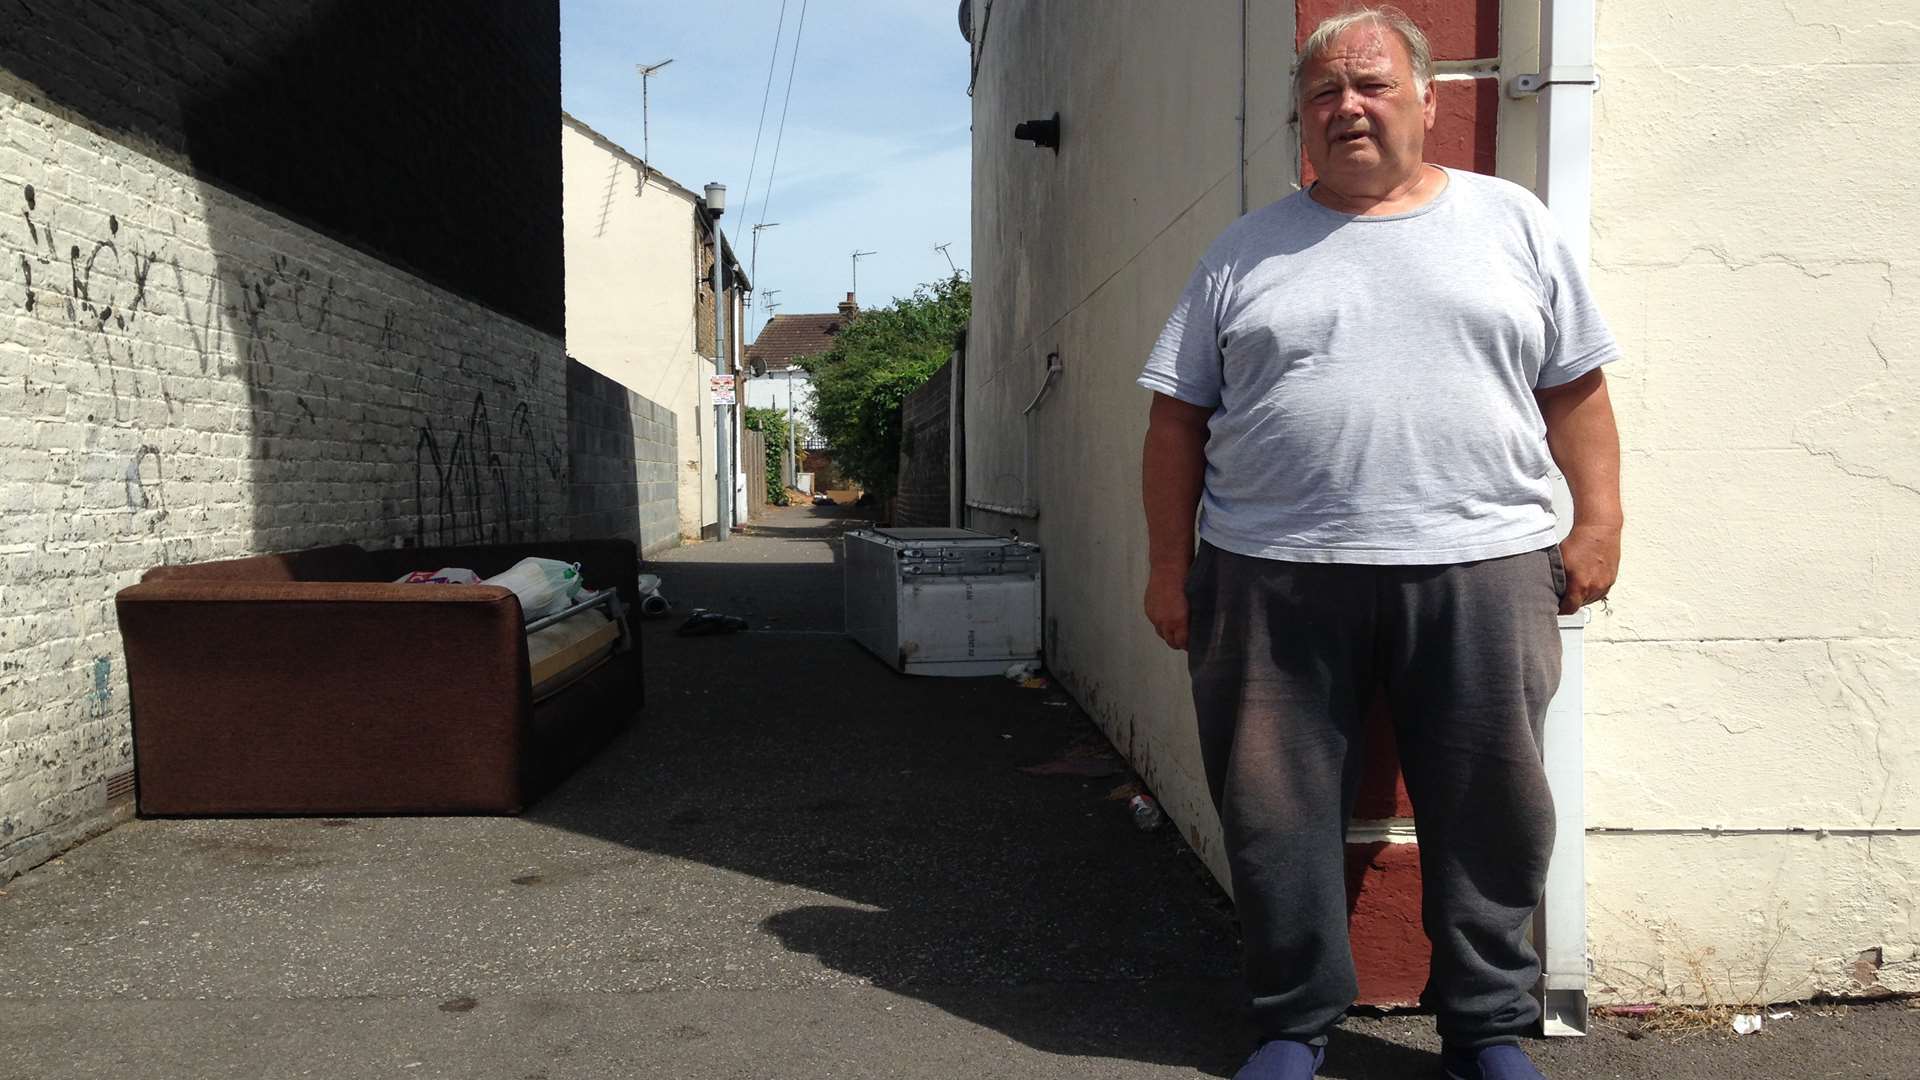 Peter Demoore said the Richmond Street alleyway is like a ghetto.